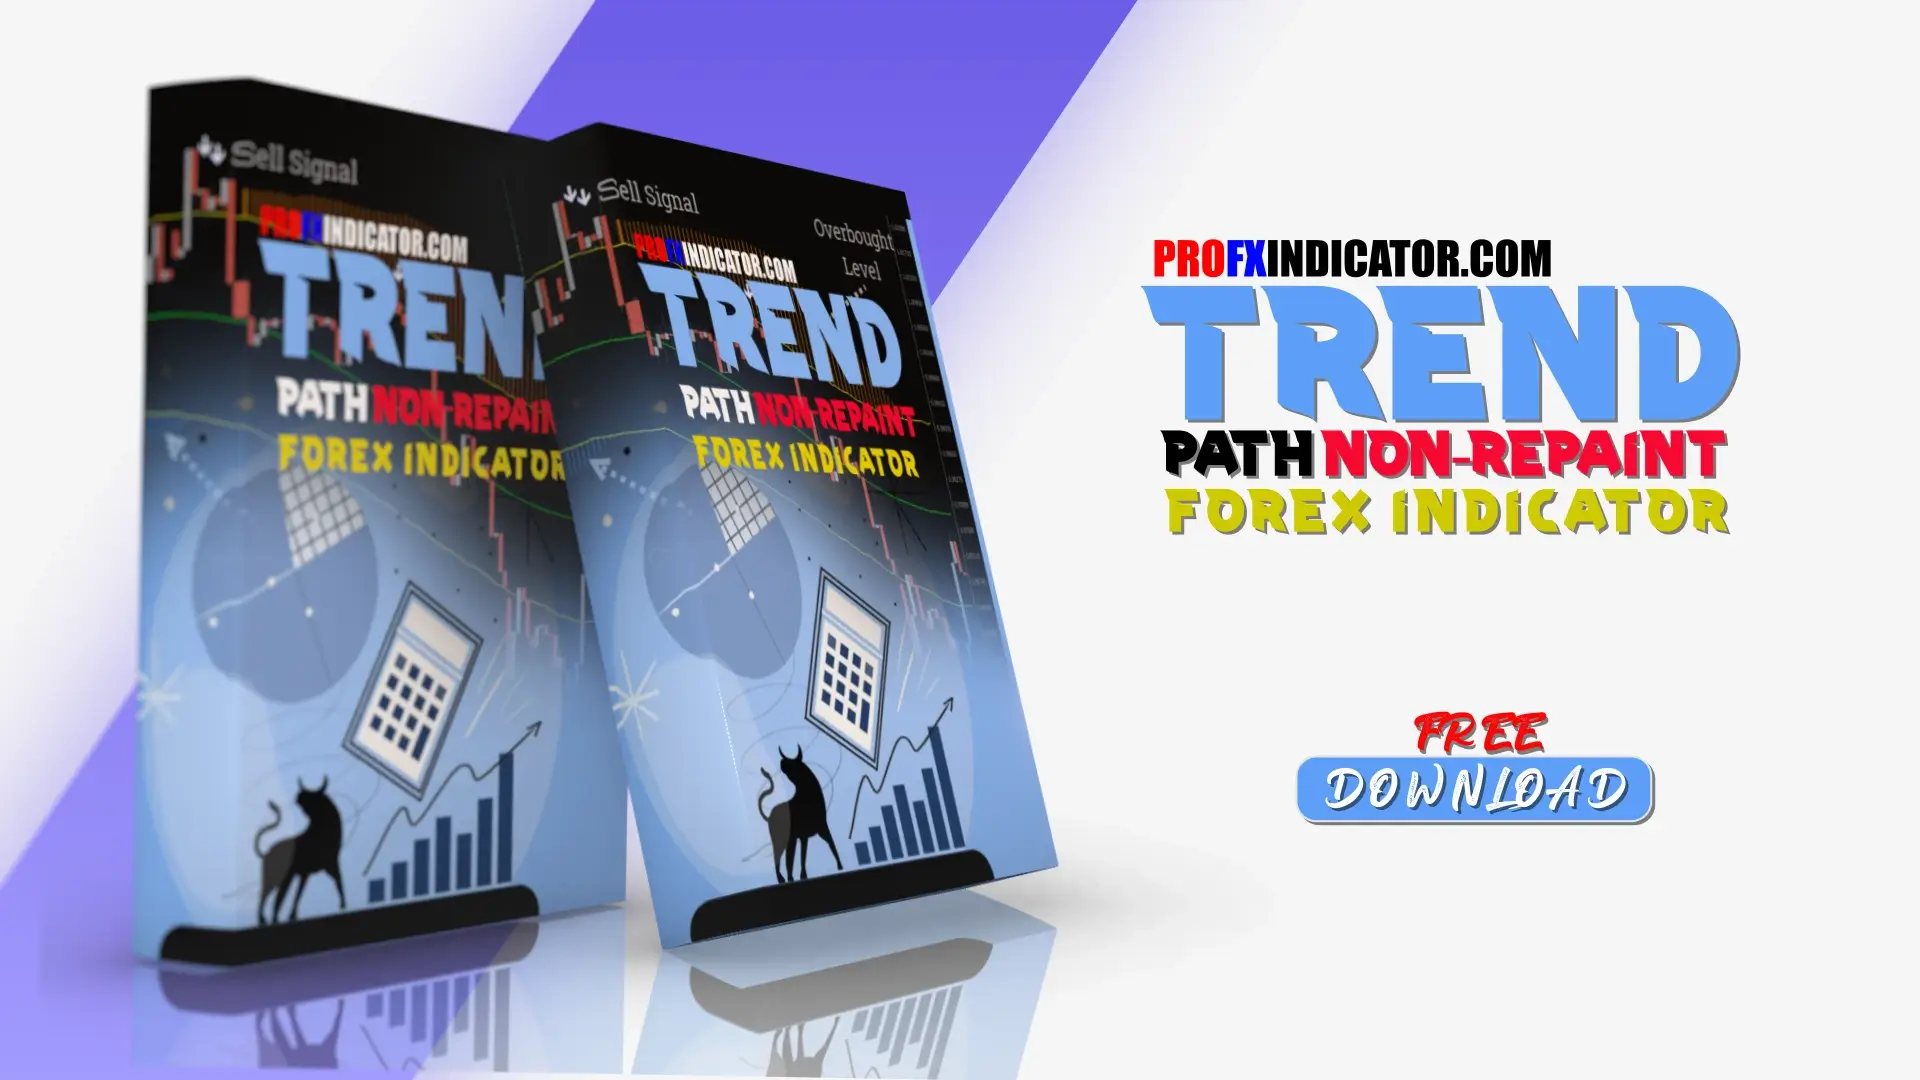 Trend Path Non-Repaint Forex Indicator